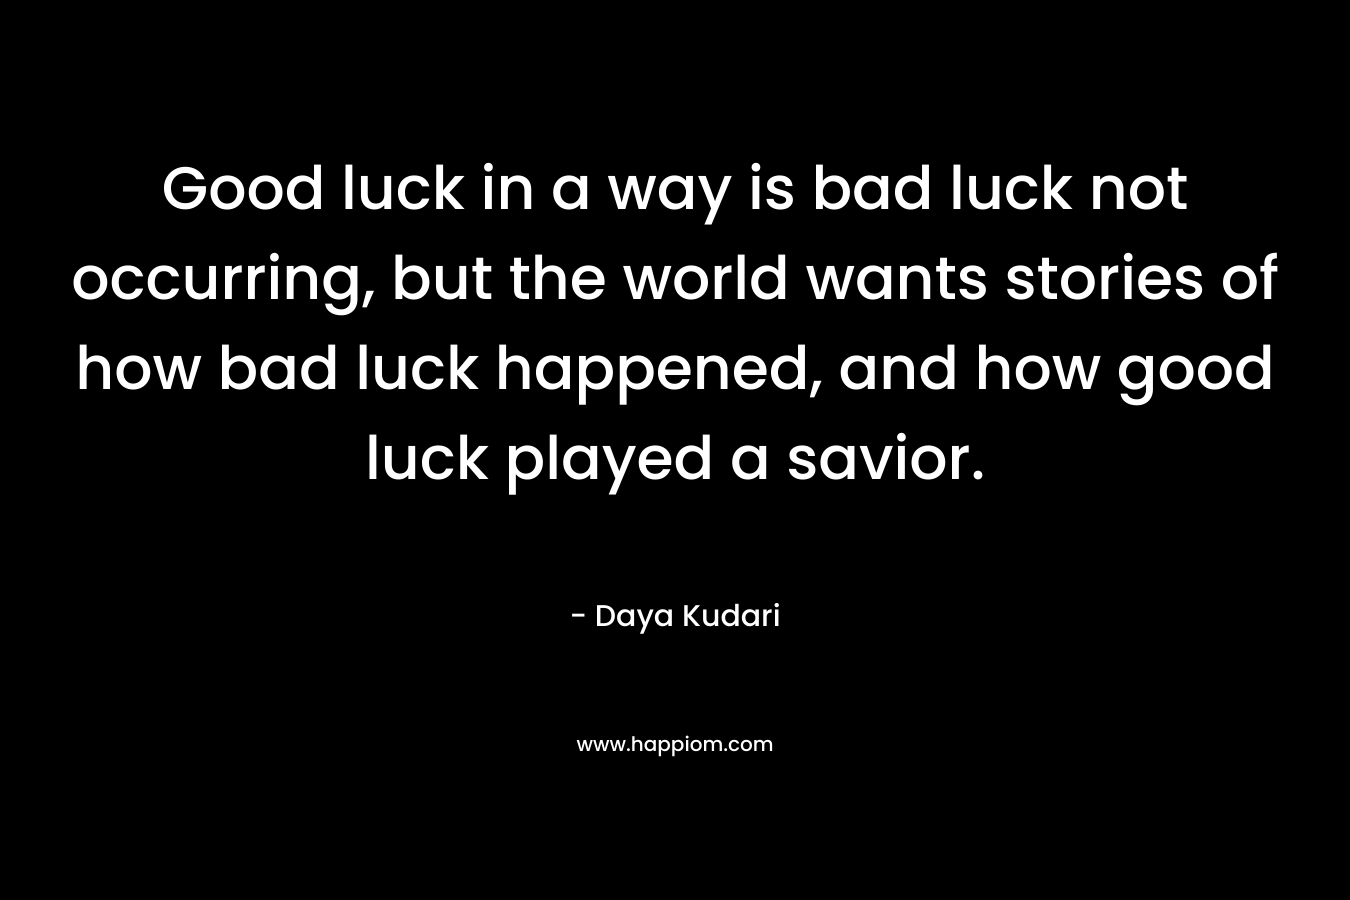 Good luck in a way is bad luck not occurring, but the world wants stories of how bad luck happened, and how good luck played a savior.